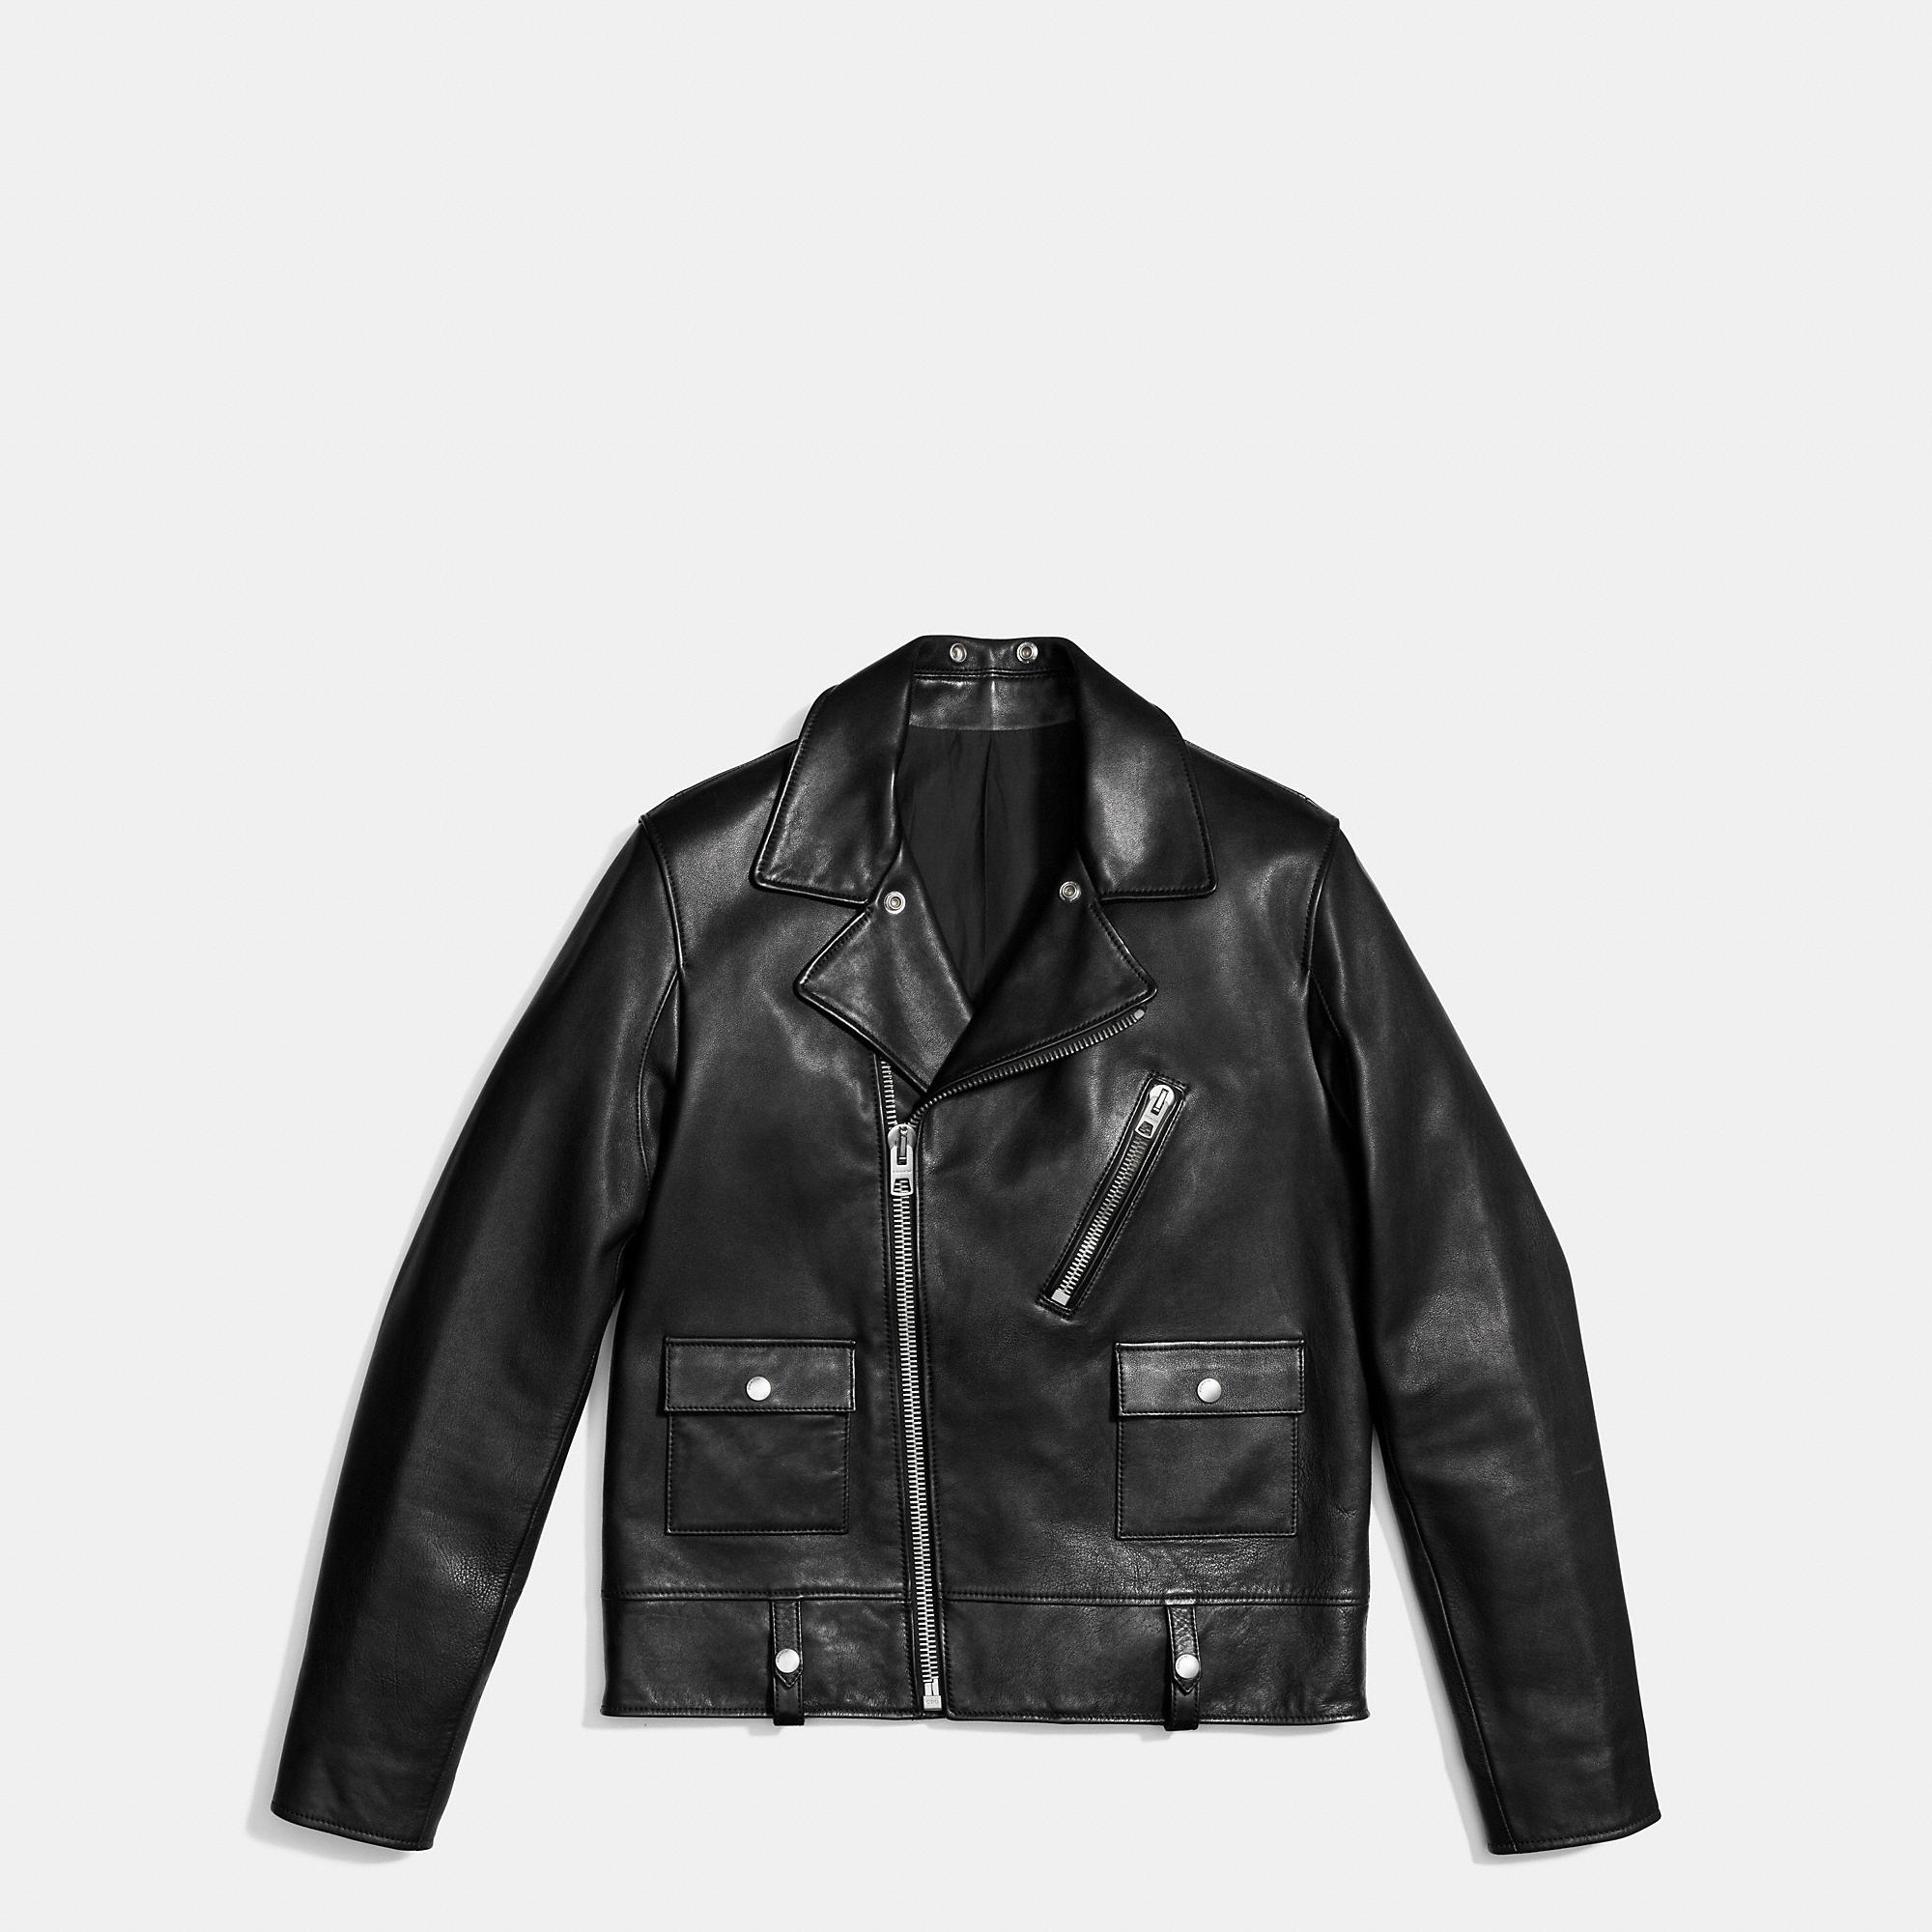 Lyst COACH Leather Motorcycle Jacket in Black for Men